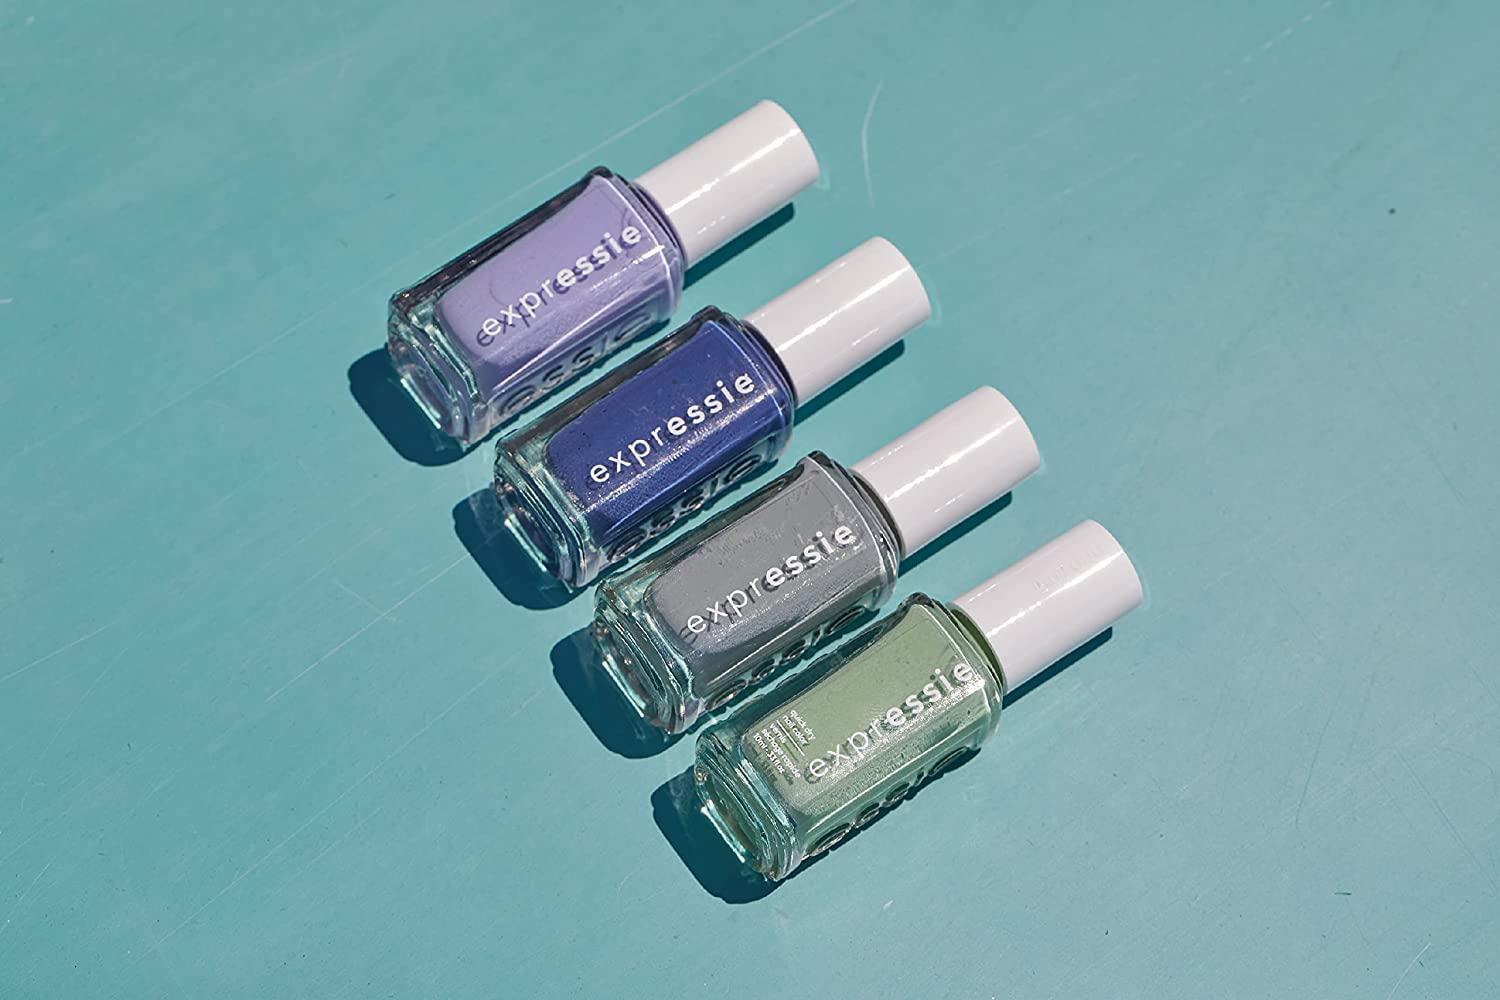 essie expressie Quick-Dry with Destiny, Nail Ounce Oz with of (Pack Destiny, blue Sk8 with Lilac, 0.33 Vegan, (lilac destiny 0.33 sk8 with undertones) 356 Sk8 1) Polish, 8-Free Fl